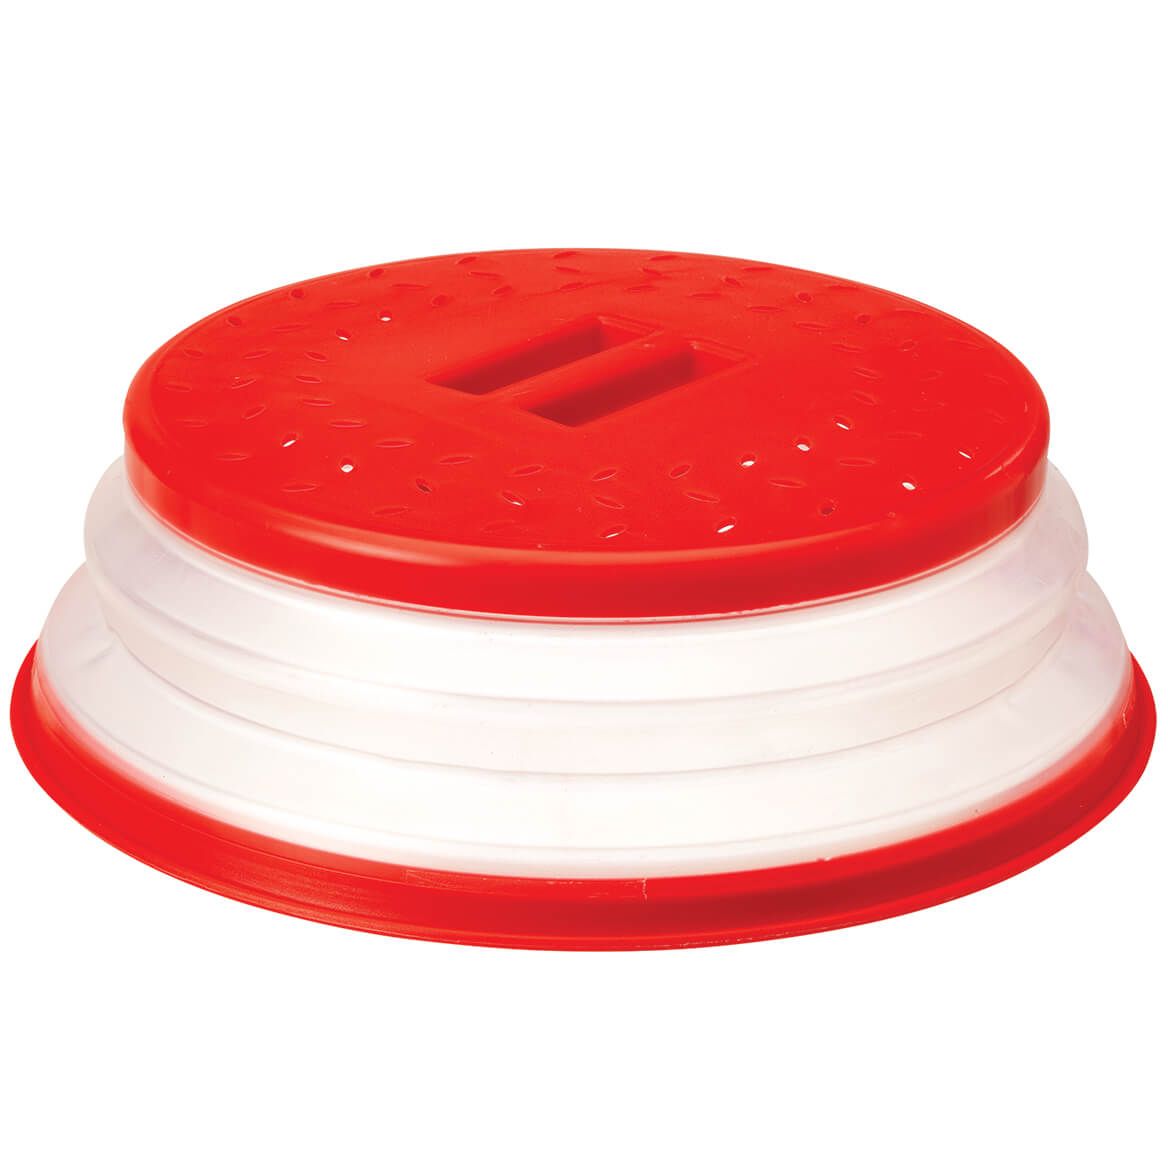 Collapsible Microwave Safe Cover by Chefs Pride + '-' + 370764